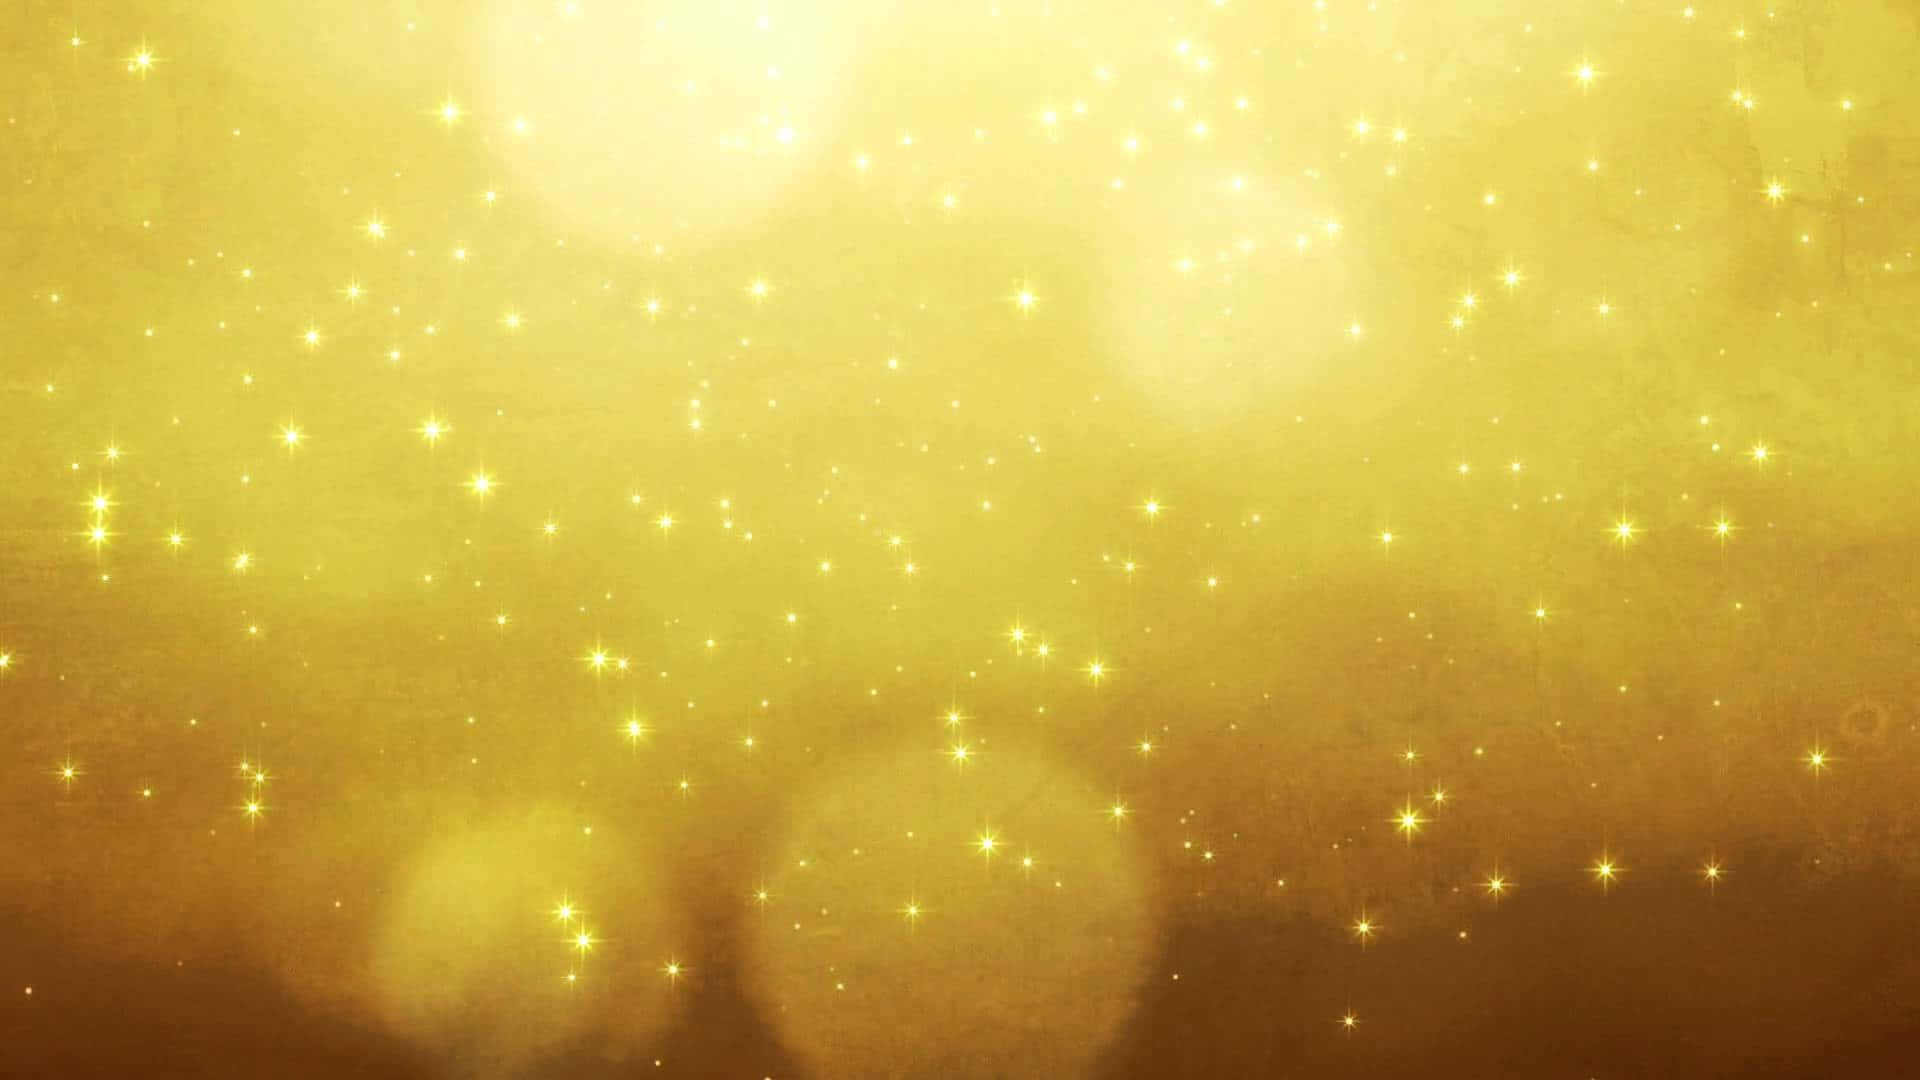 Download High Resolution Gold Glitter Background | Wallpapers.com